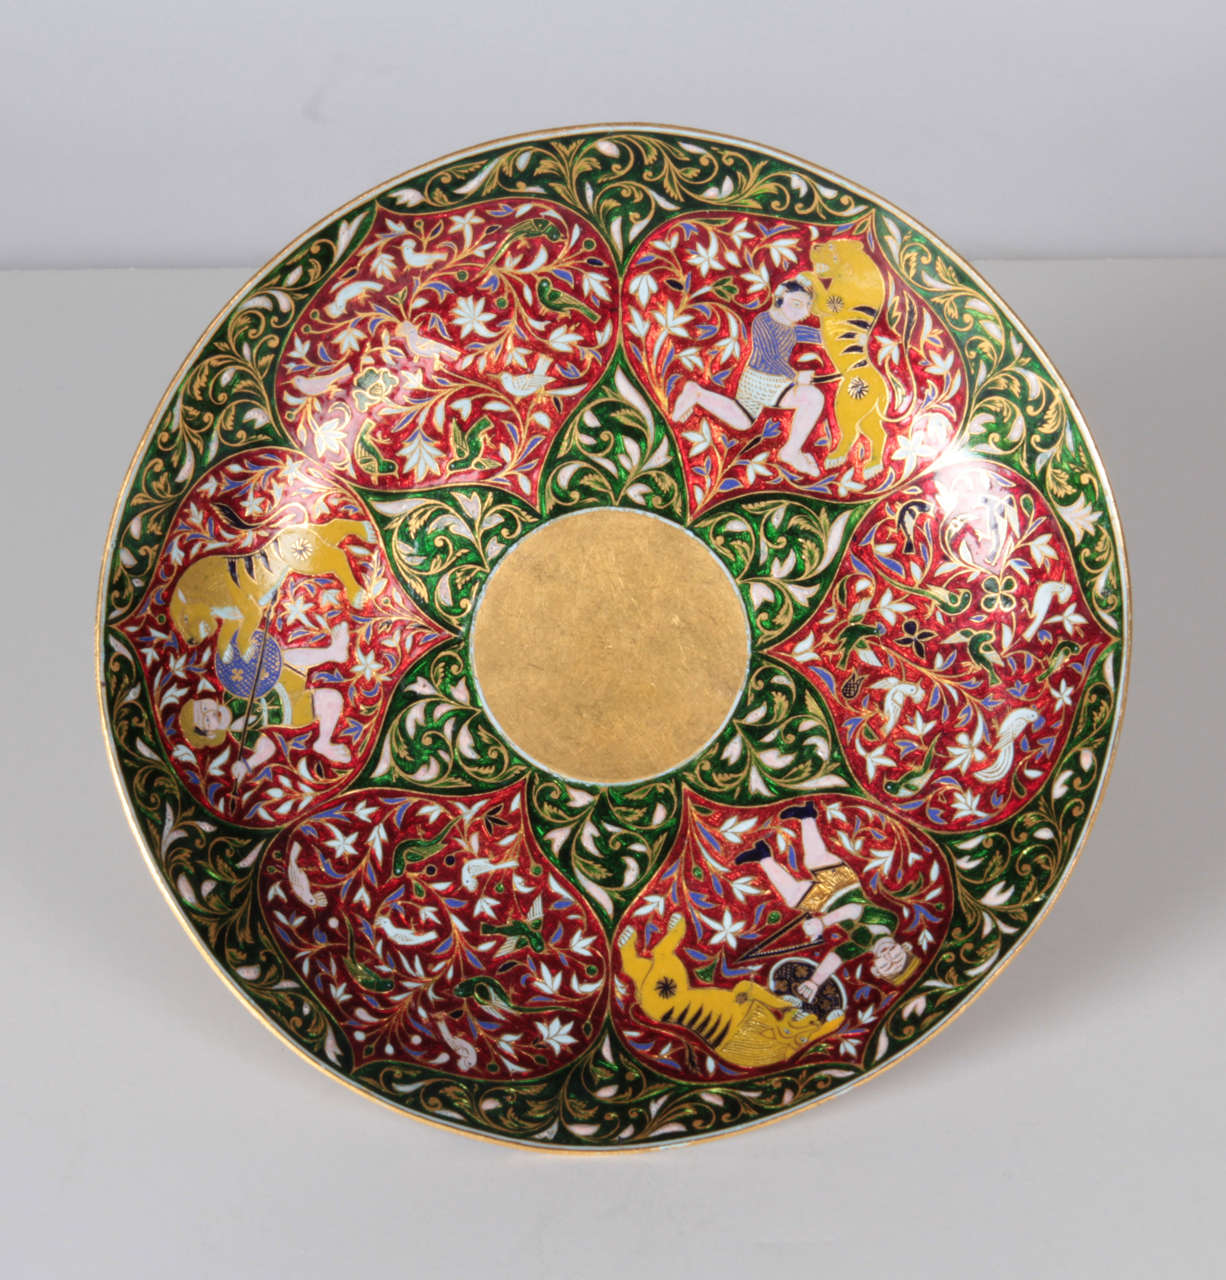 Jaipur Enameled and Gem Set Rare Solid Gold Cup and Saucer mid 19th Century For Sale 2